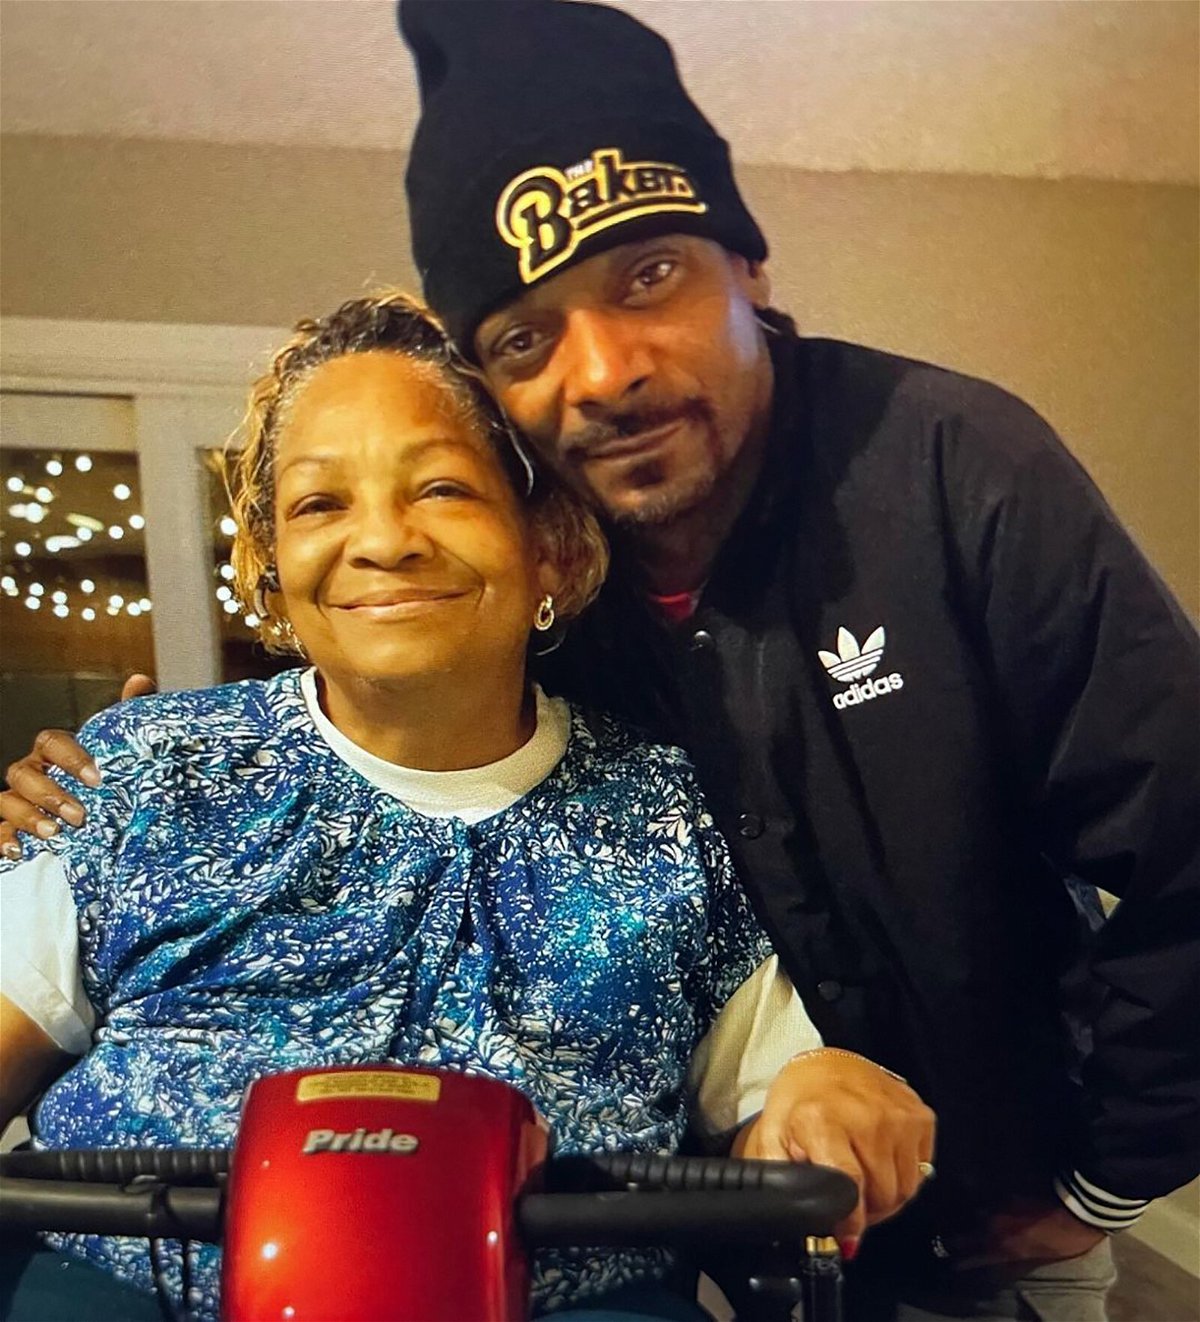 <i>Snoop Dogg/Instagram</i><br/>Snoop Dogg shared a photo of himself and his mom to Instagram with the caption